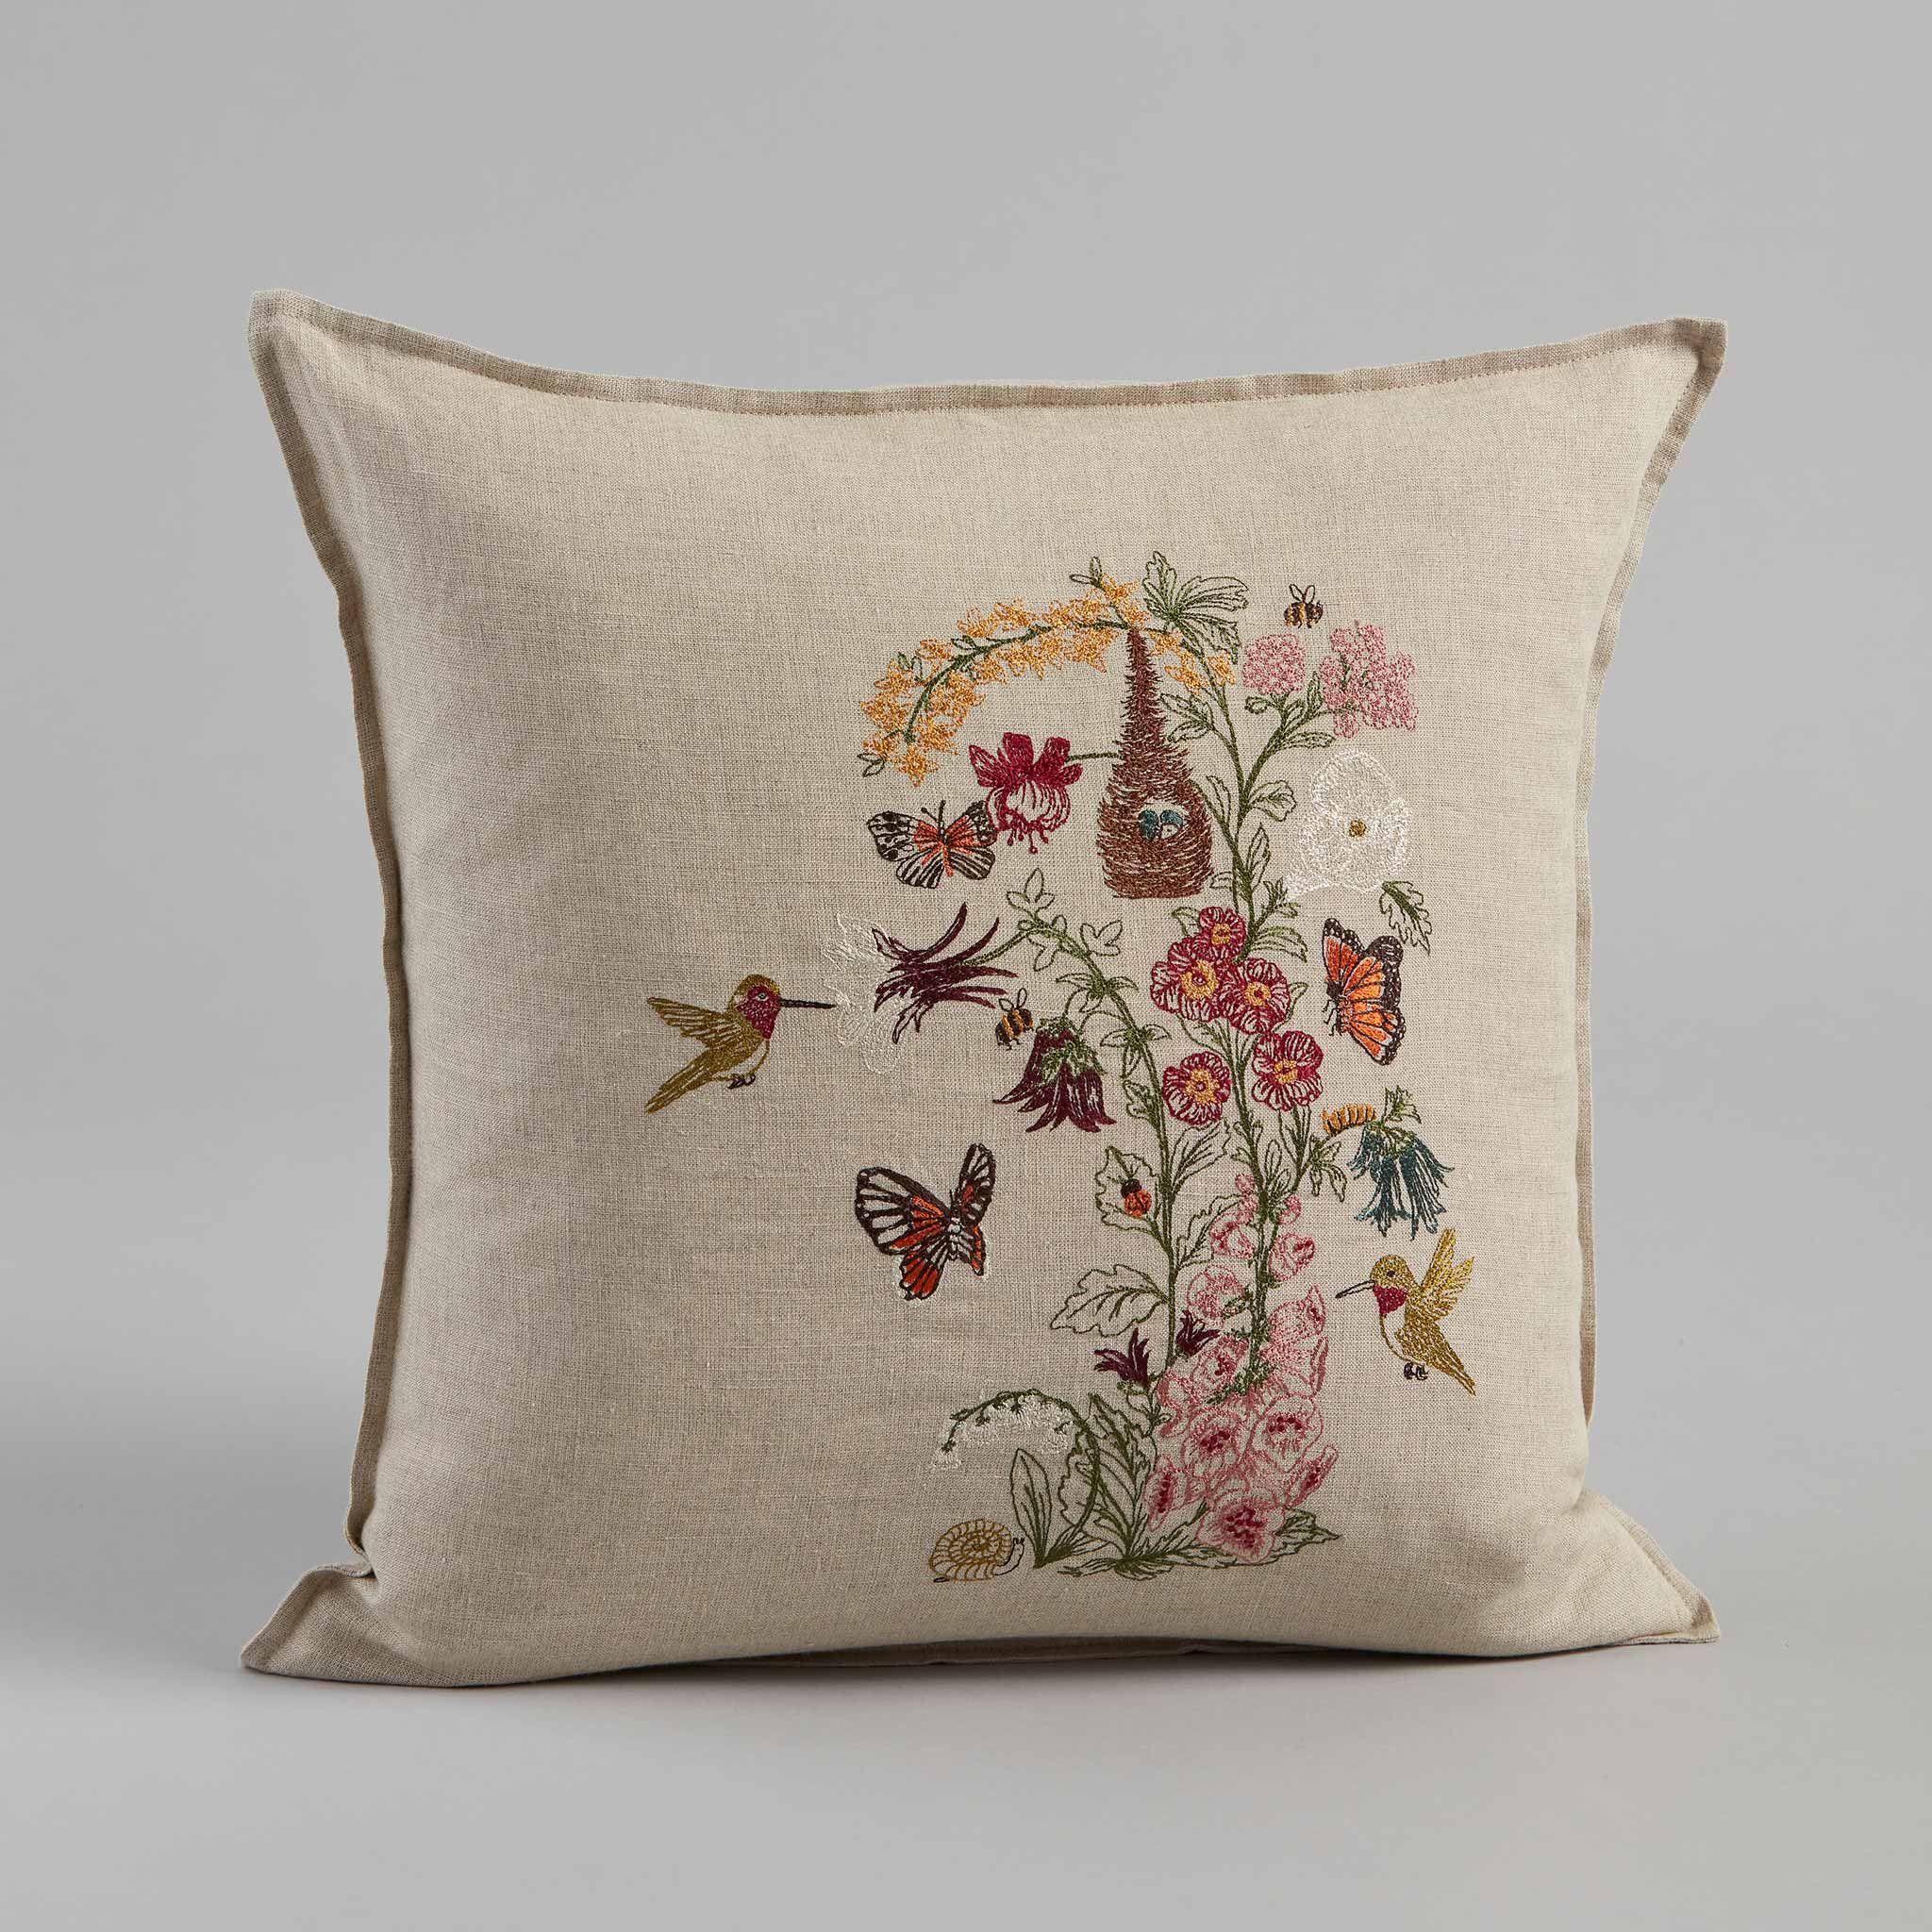 Two Humming Birds with Pink Flowers Needlepoint Pillow